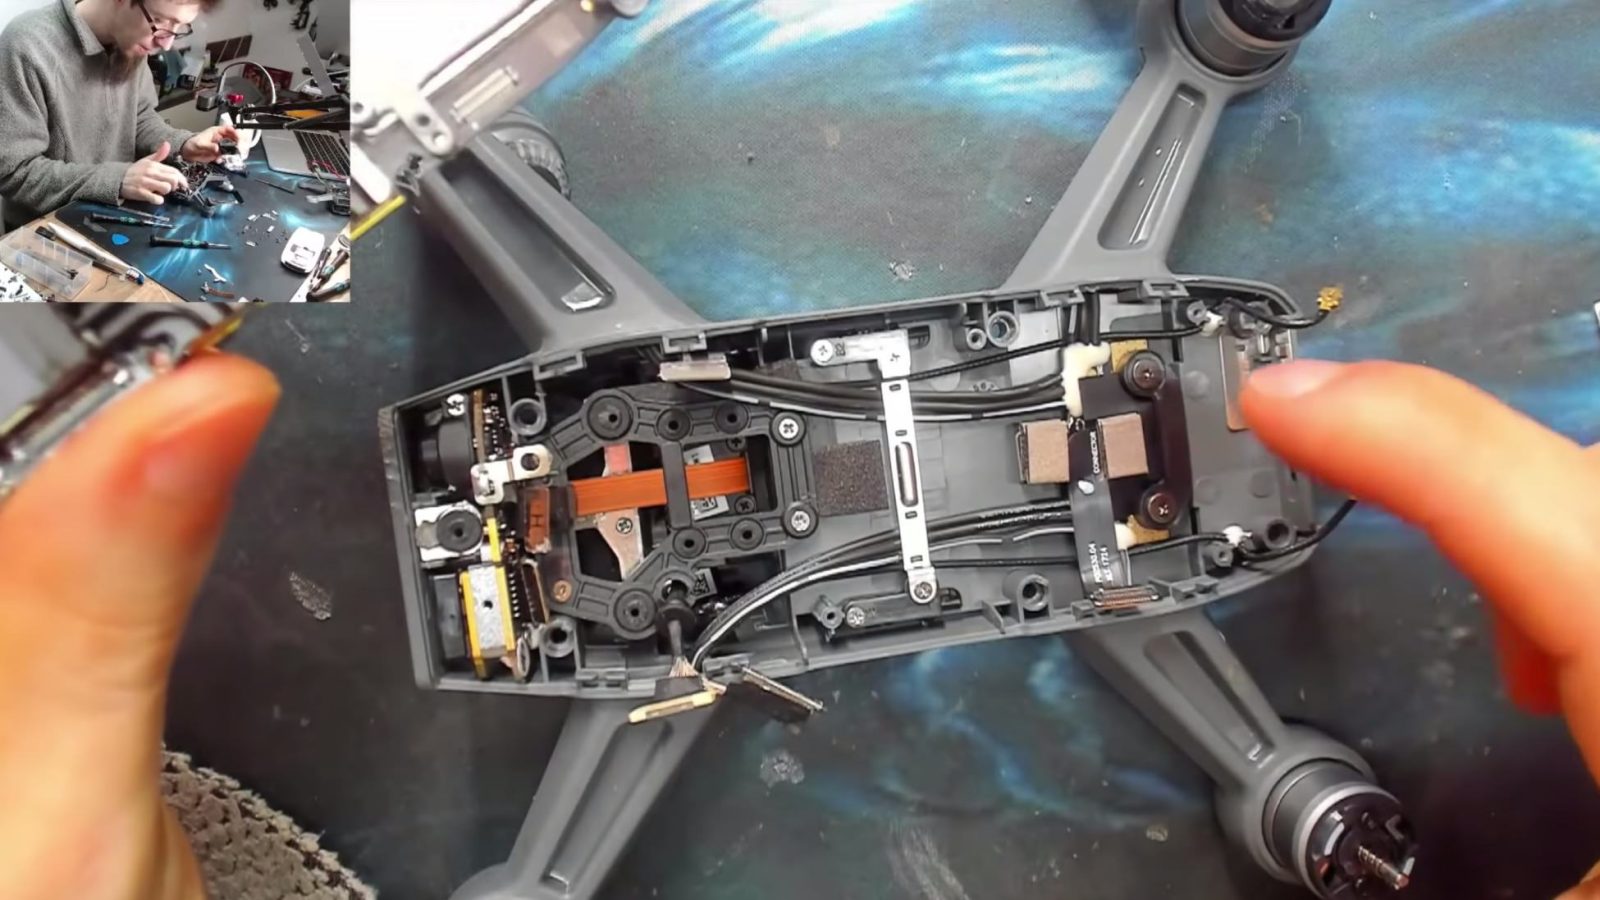 Full DJI Spark transplant of its internal components to new body shell